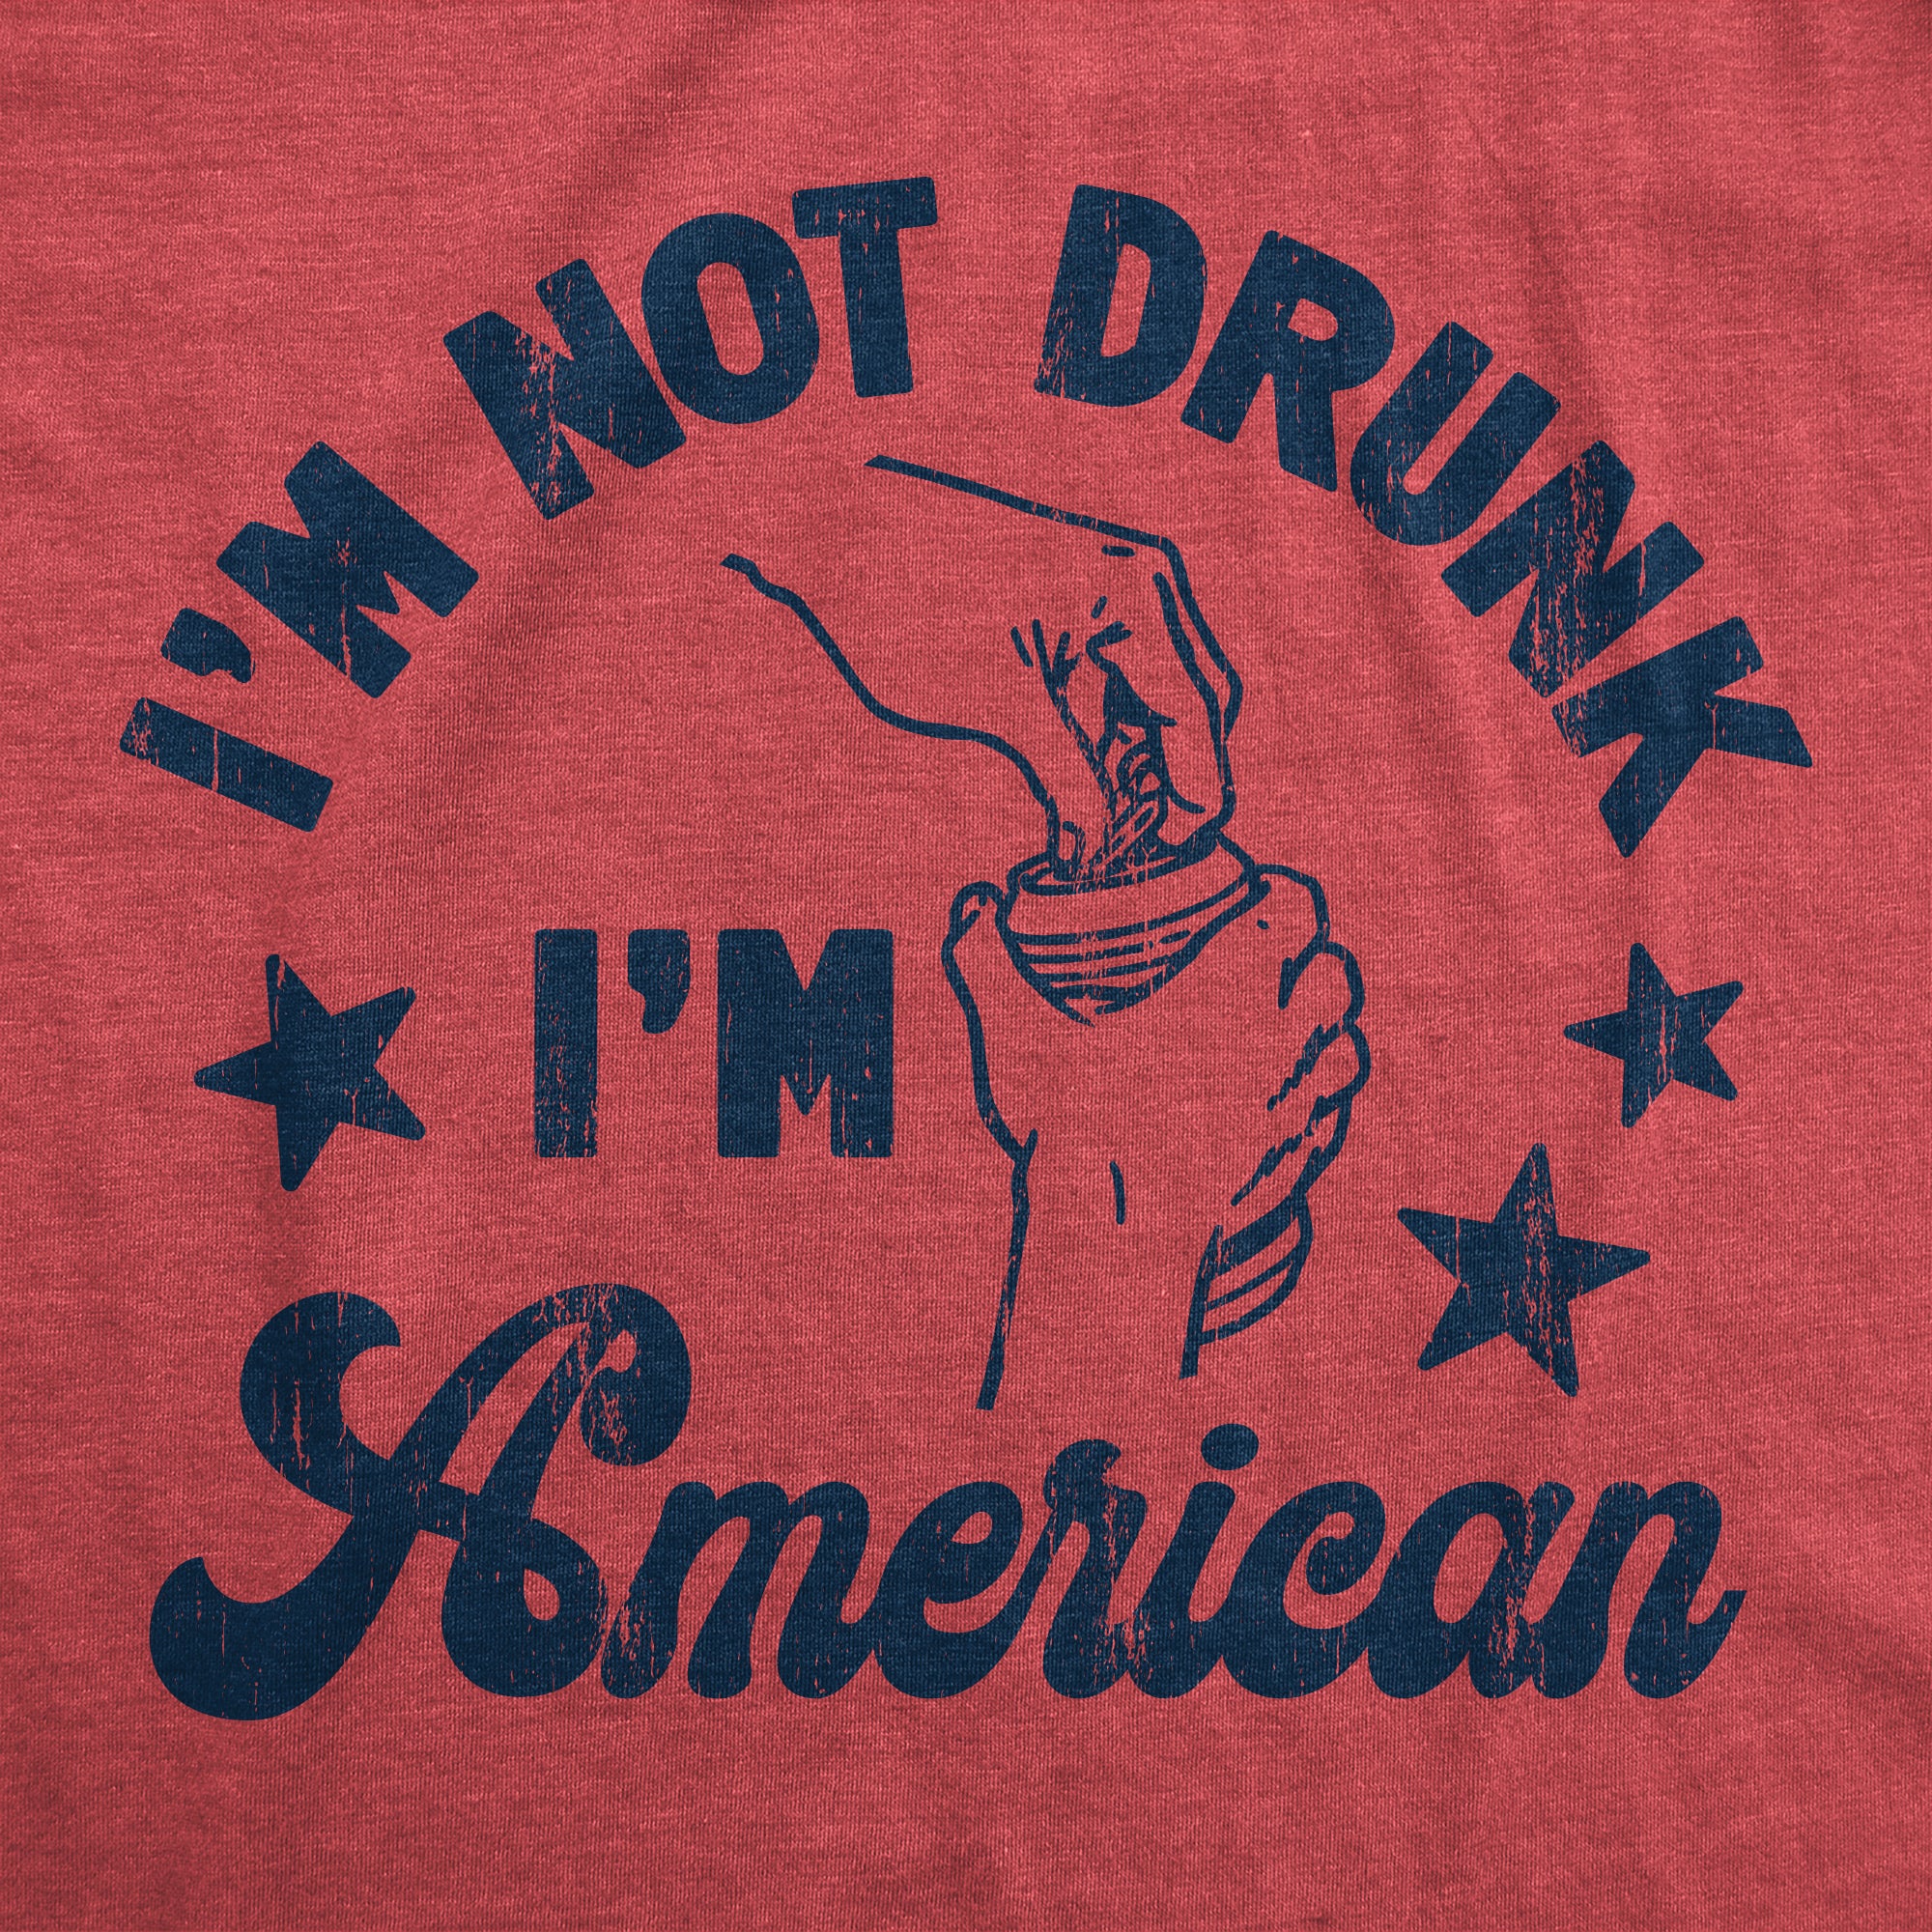 Funny Heather Red - Drunk American Im Not Drunk Im American Mens T Shirt Nerdy Fourth of July Drinking Tee